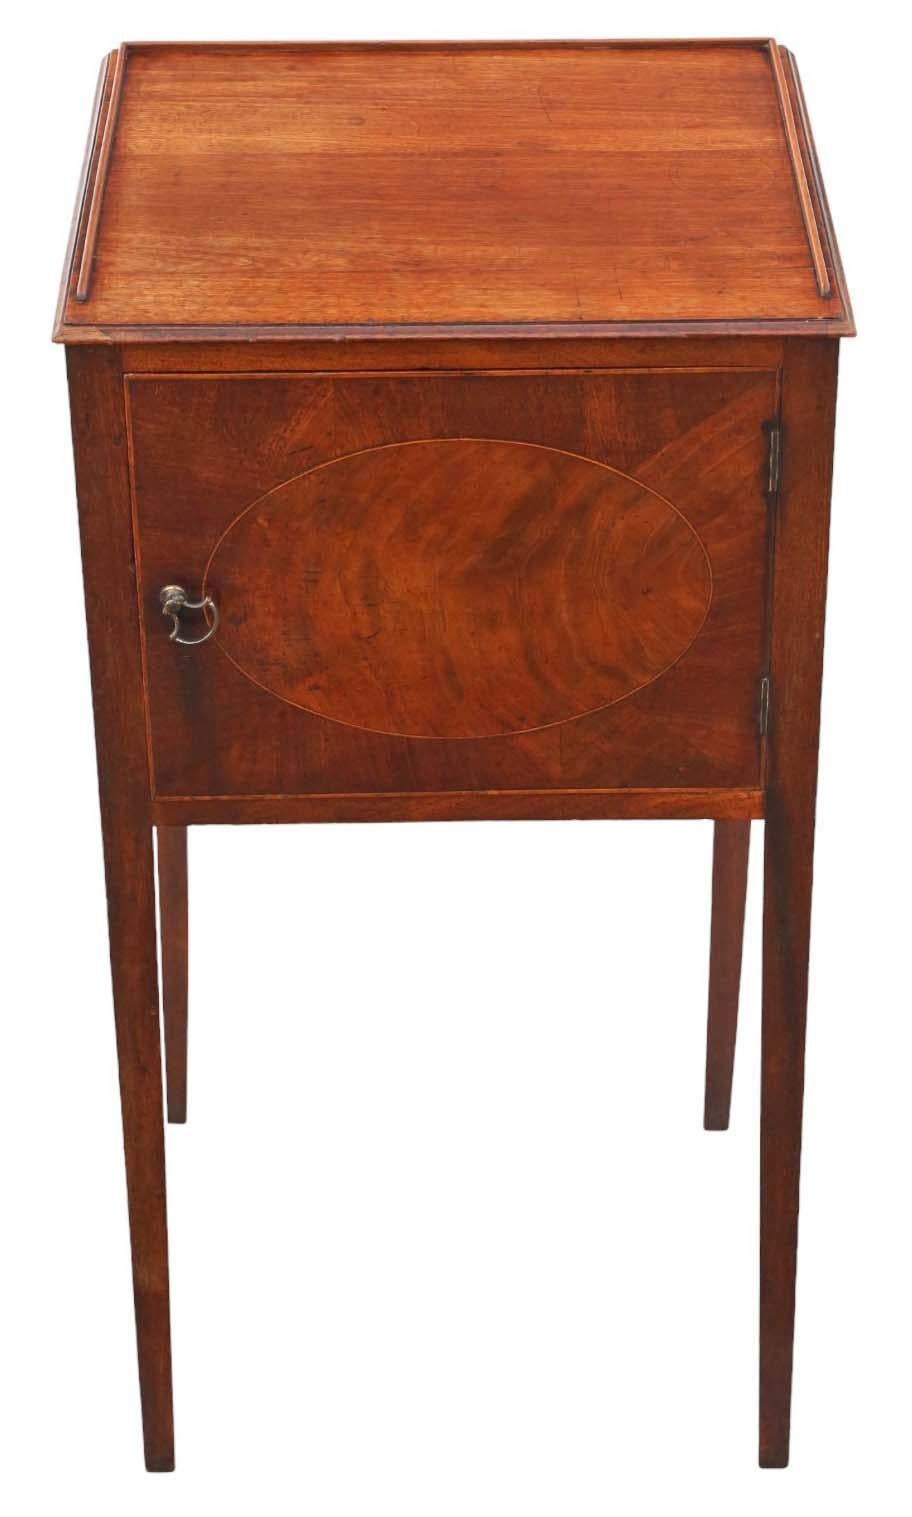 Antique, high-quality 19th-century Georgian nightstand, mahogany washstand bedside table. This piece showcases the finest coloration and patina.

A remarkable and uncommon find, boasting sturdy construction with no loose joints. The door securely